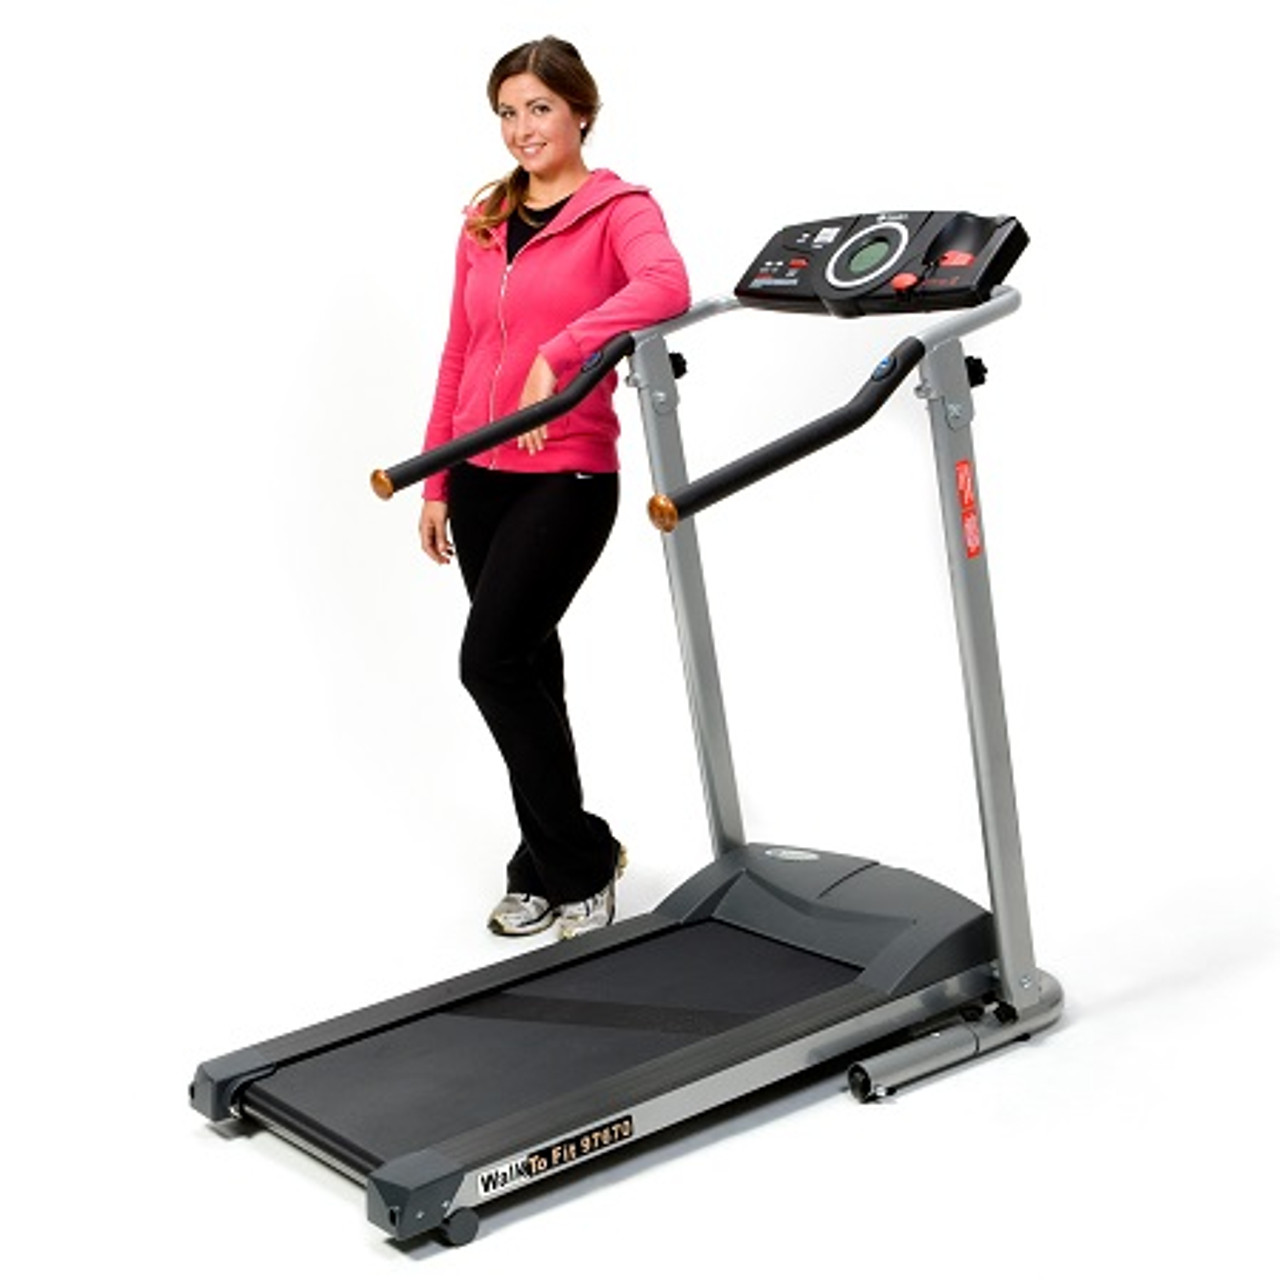 Exerpeutic TF1000 Ultra High Capacity Walk to Fitness Electric Treadmill Features